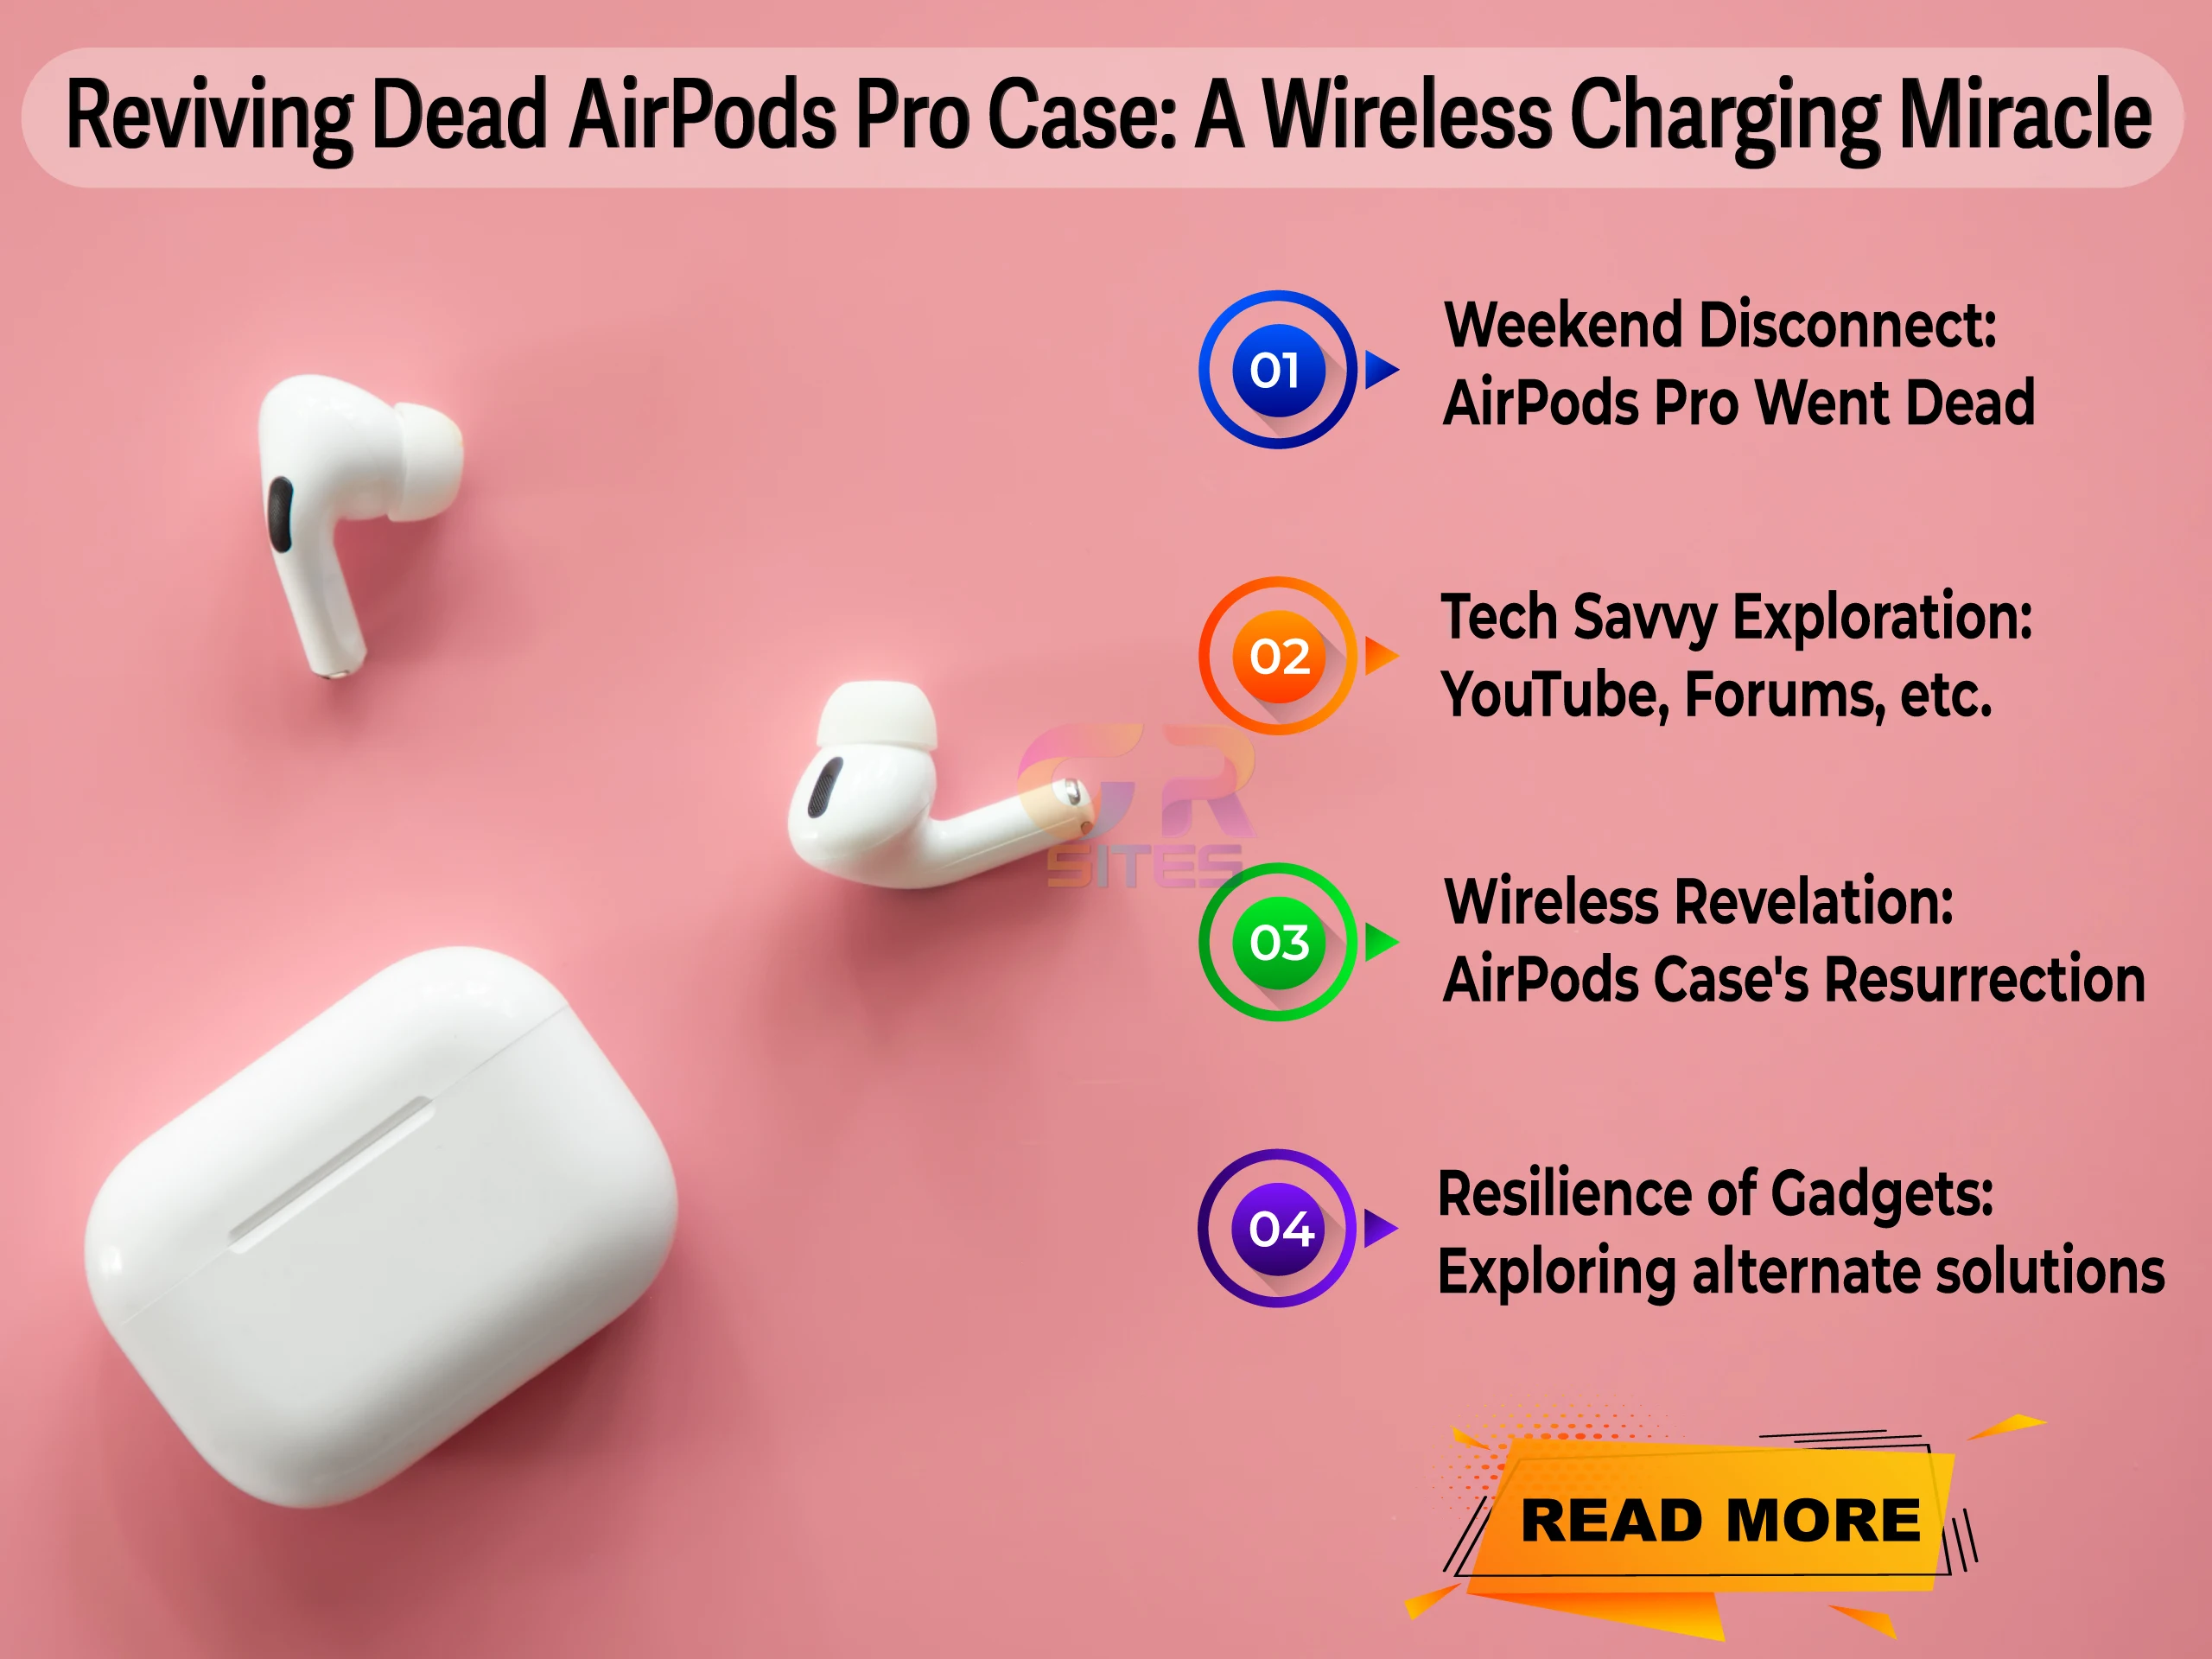 Reviving Dead AirPods Pro: A Tale of Wireless Charging Magic